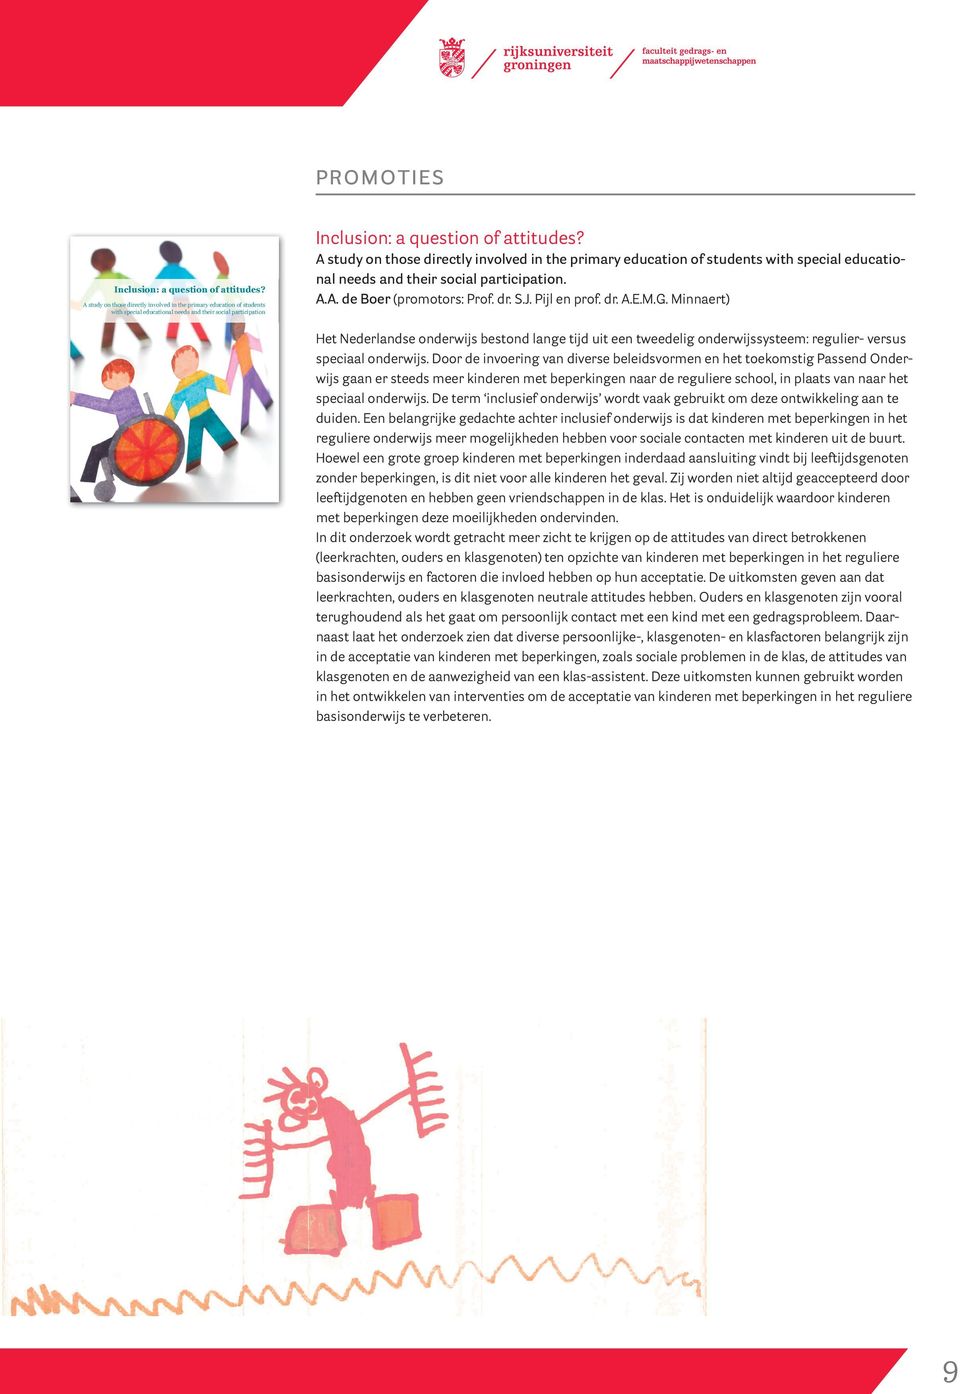 UITNODIGING A study on those directly involved in the primary education of students with special educational needs and their social participation. A.A. de Boer (promotors: Prof. dr. S.J. Pijl en prof.